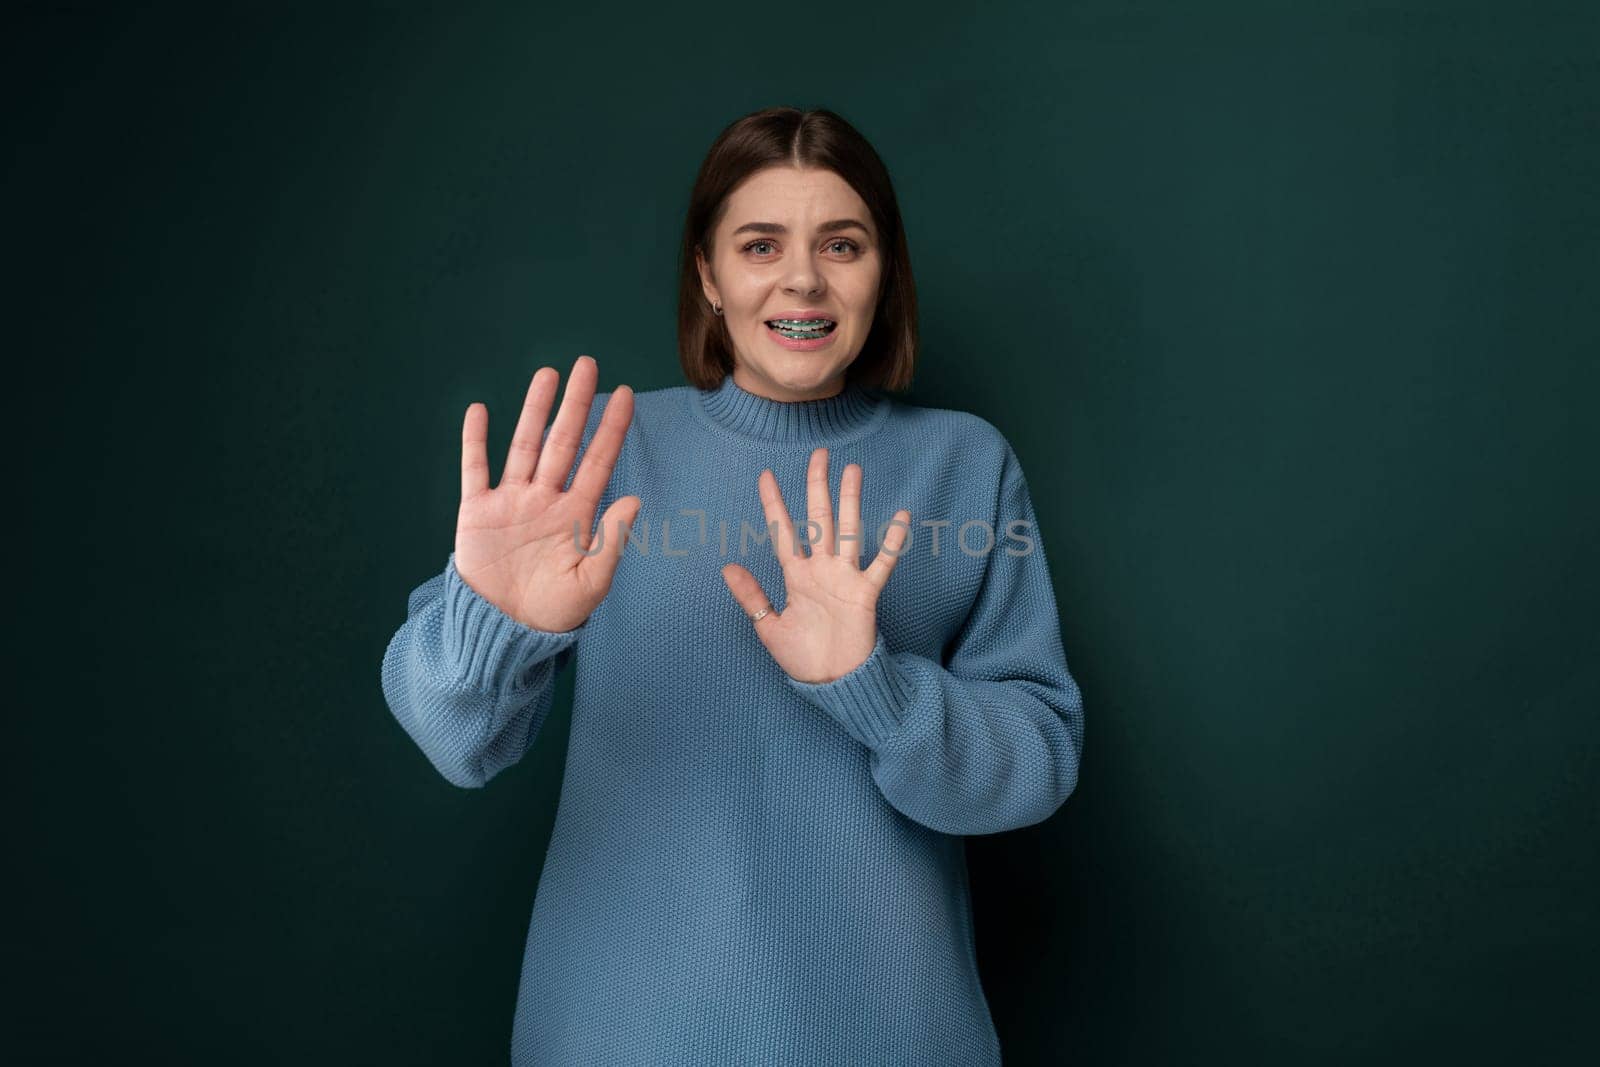 A woman wearing a blue sweater is standing with her hands raised up. She appears to be in a pose of surrender or excitement, with a neutral expression on her face.